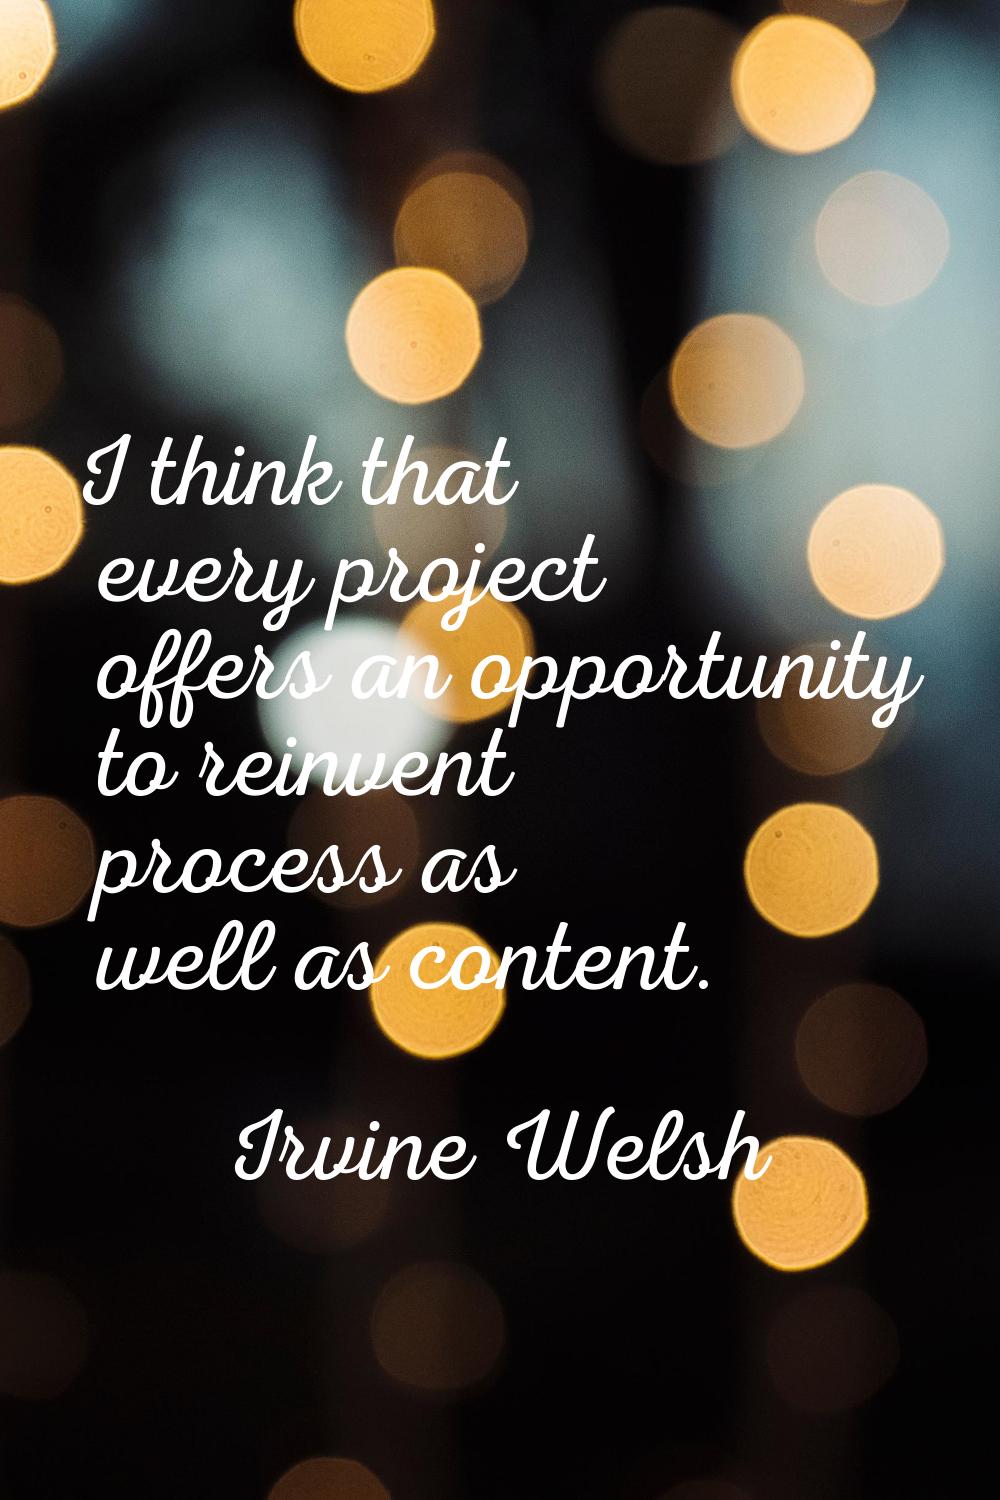 I think that every project offers an opportunity to reinvent process as well as content.